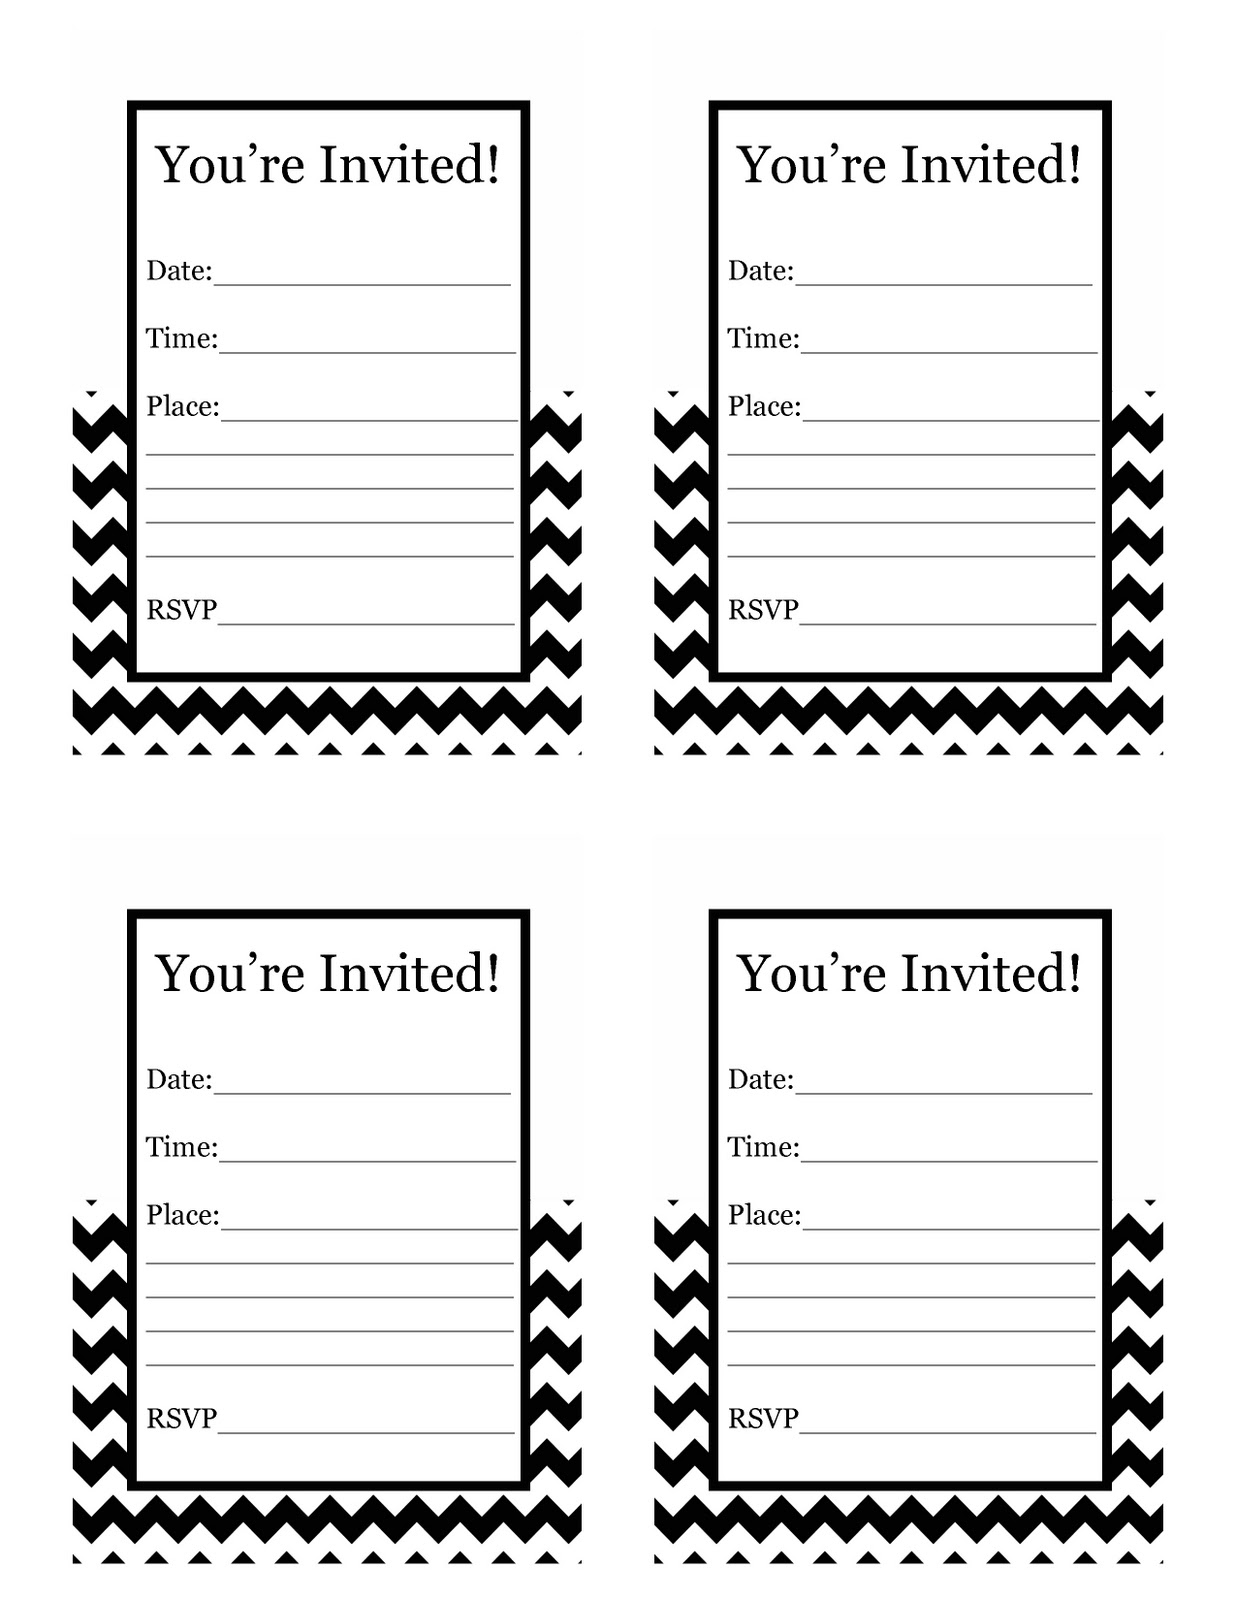 blank-circus-invitations-templates-free-clipart-best